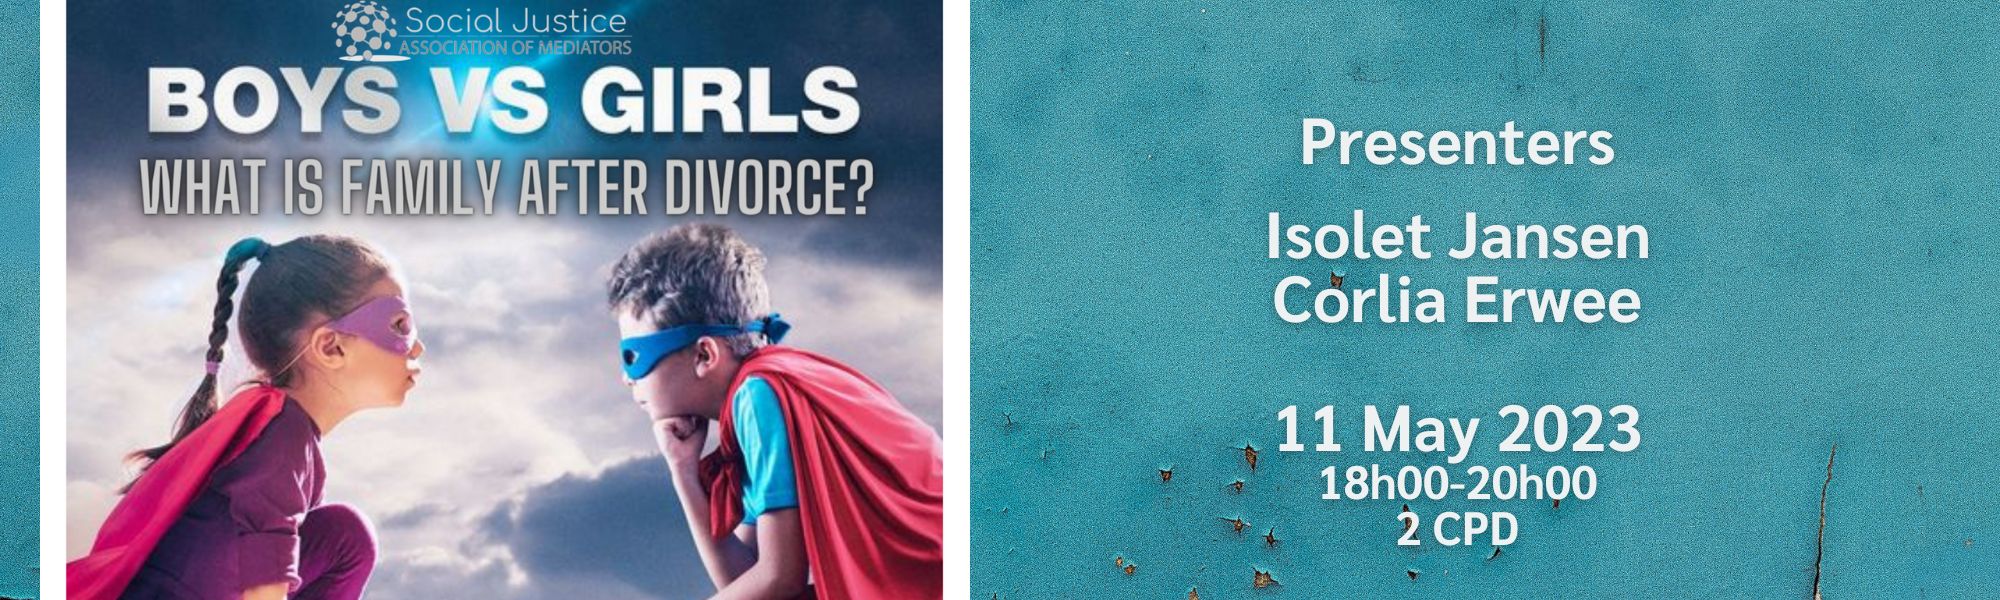 What is family after divorce?  Boys vs Girls